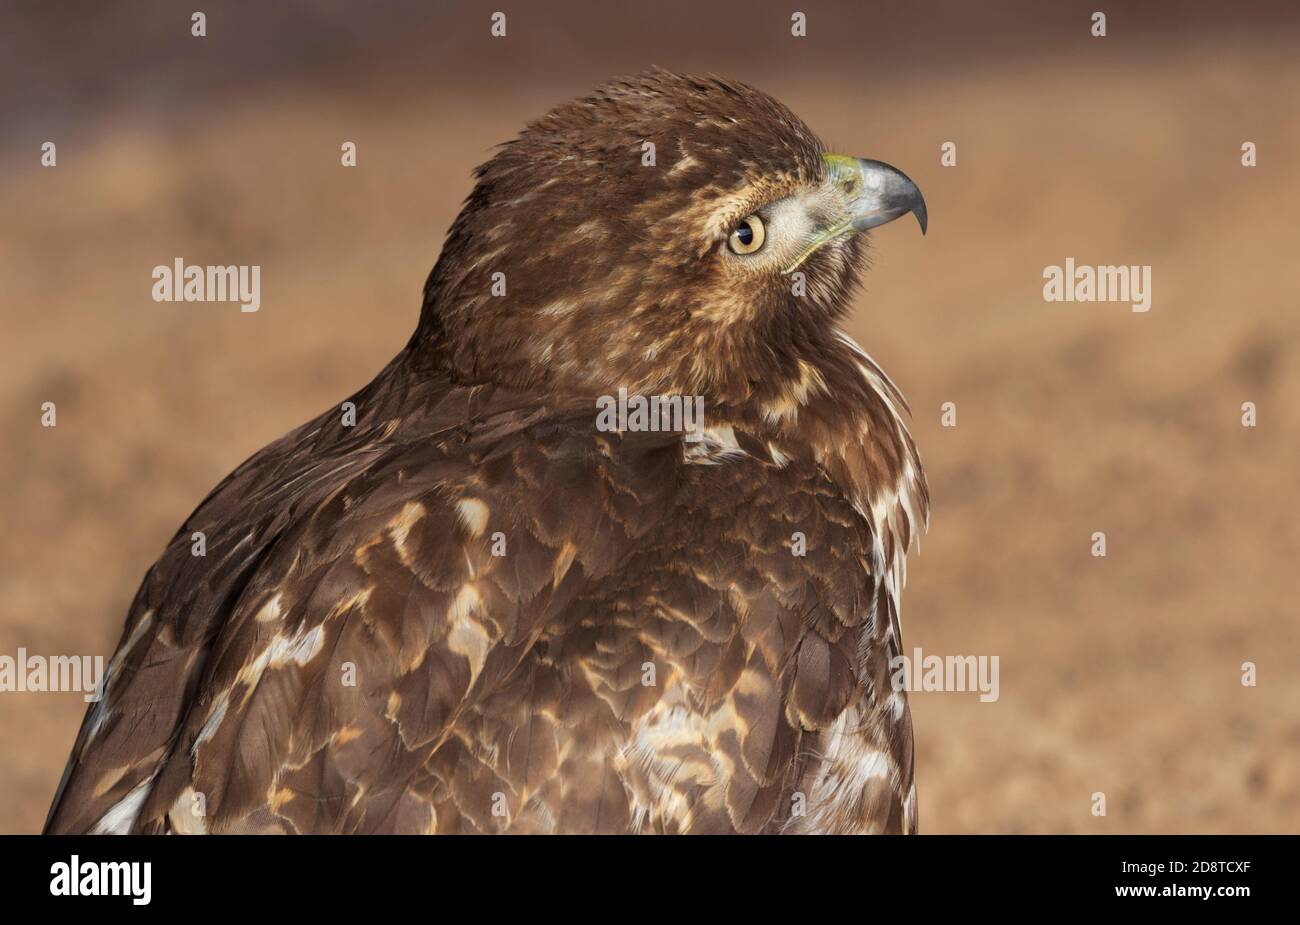 Red tailed hawk portrait made with expressive allure of cocked head at Bosque del Apache National Wildlife Refuge in New Mexico Stock Photo